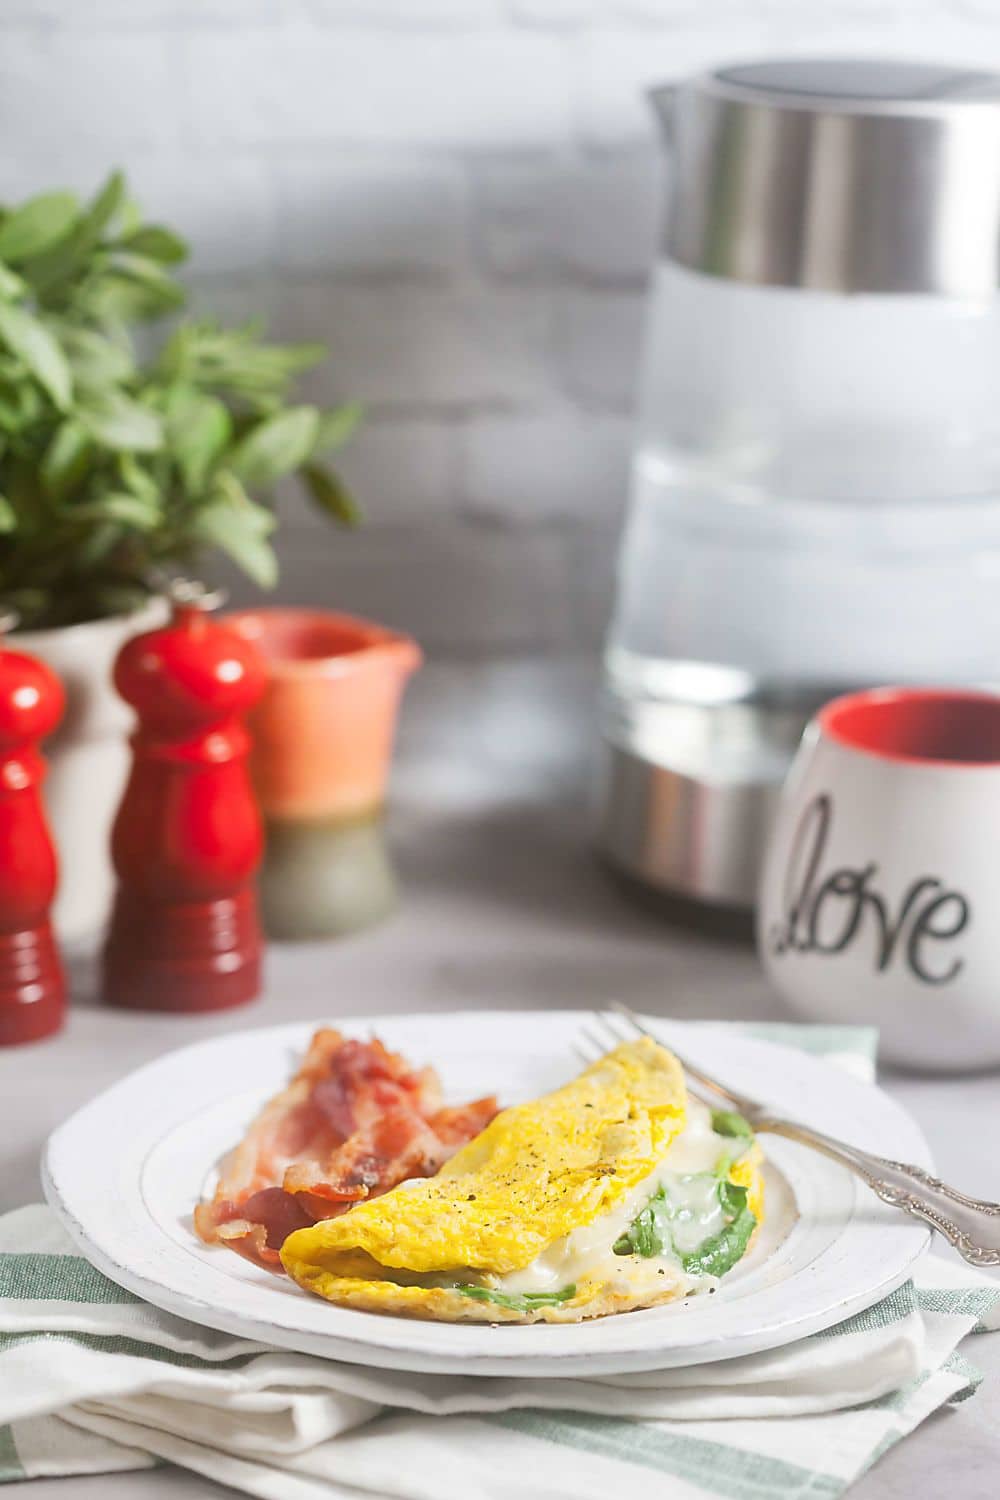 Microwave Omelette Maker, Quick and Healthy Breakfast in Minutes